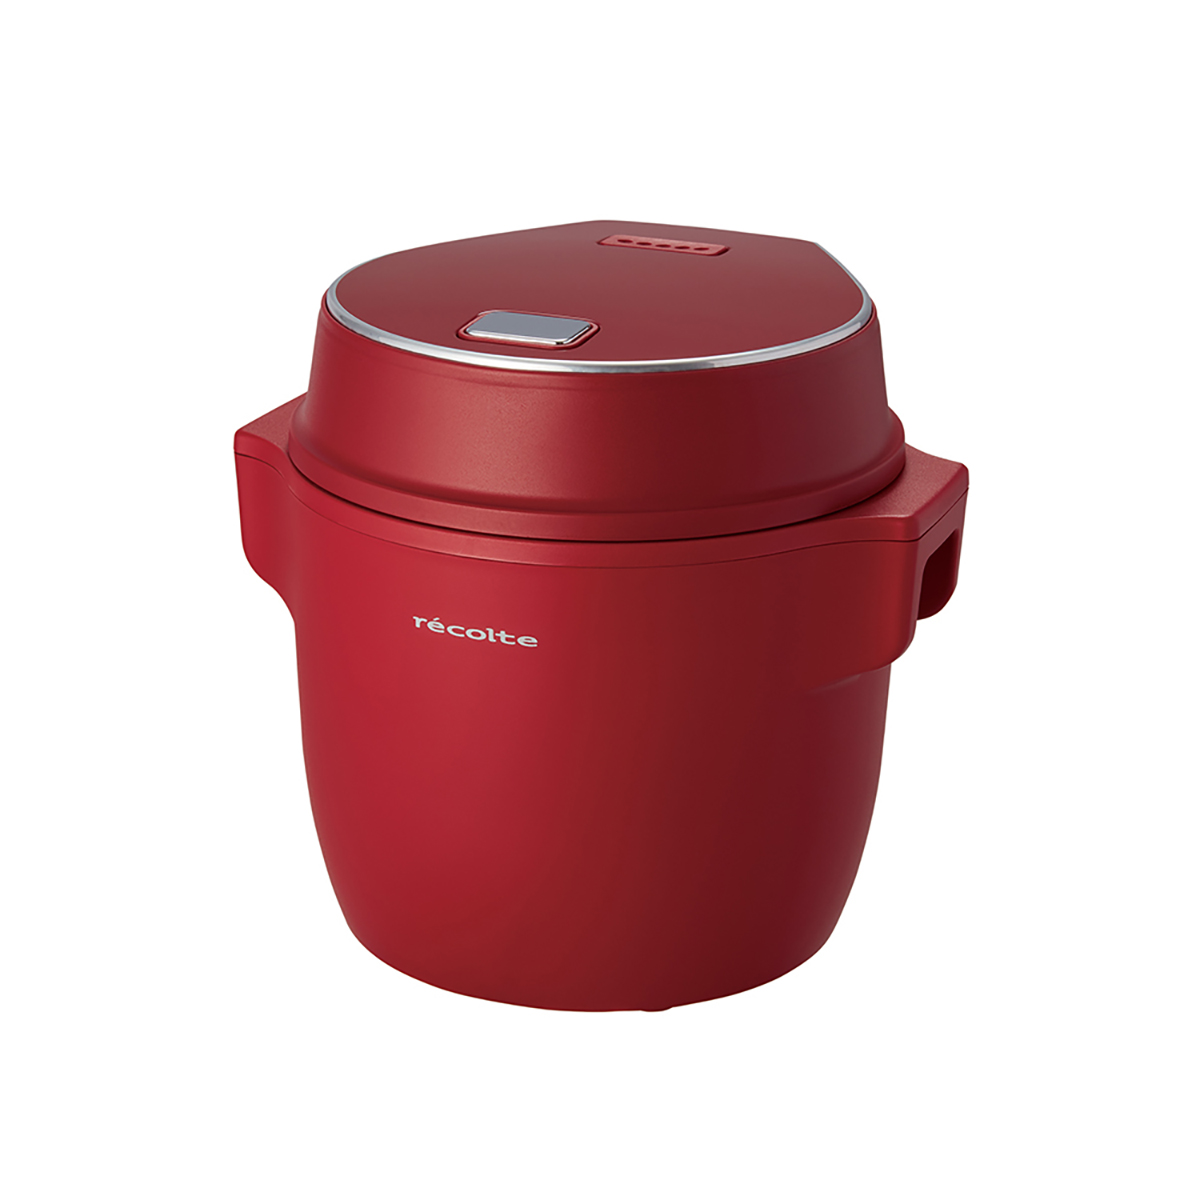 recolte Compact Rice Cooker